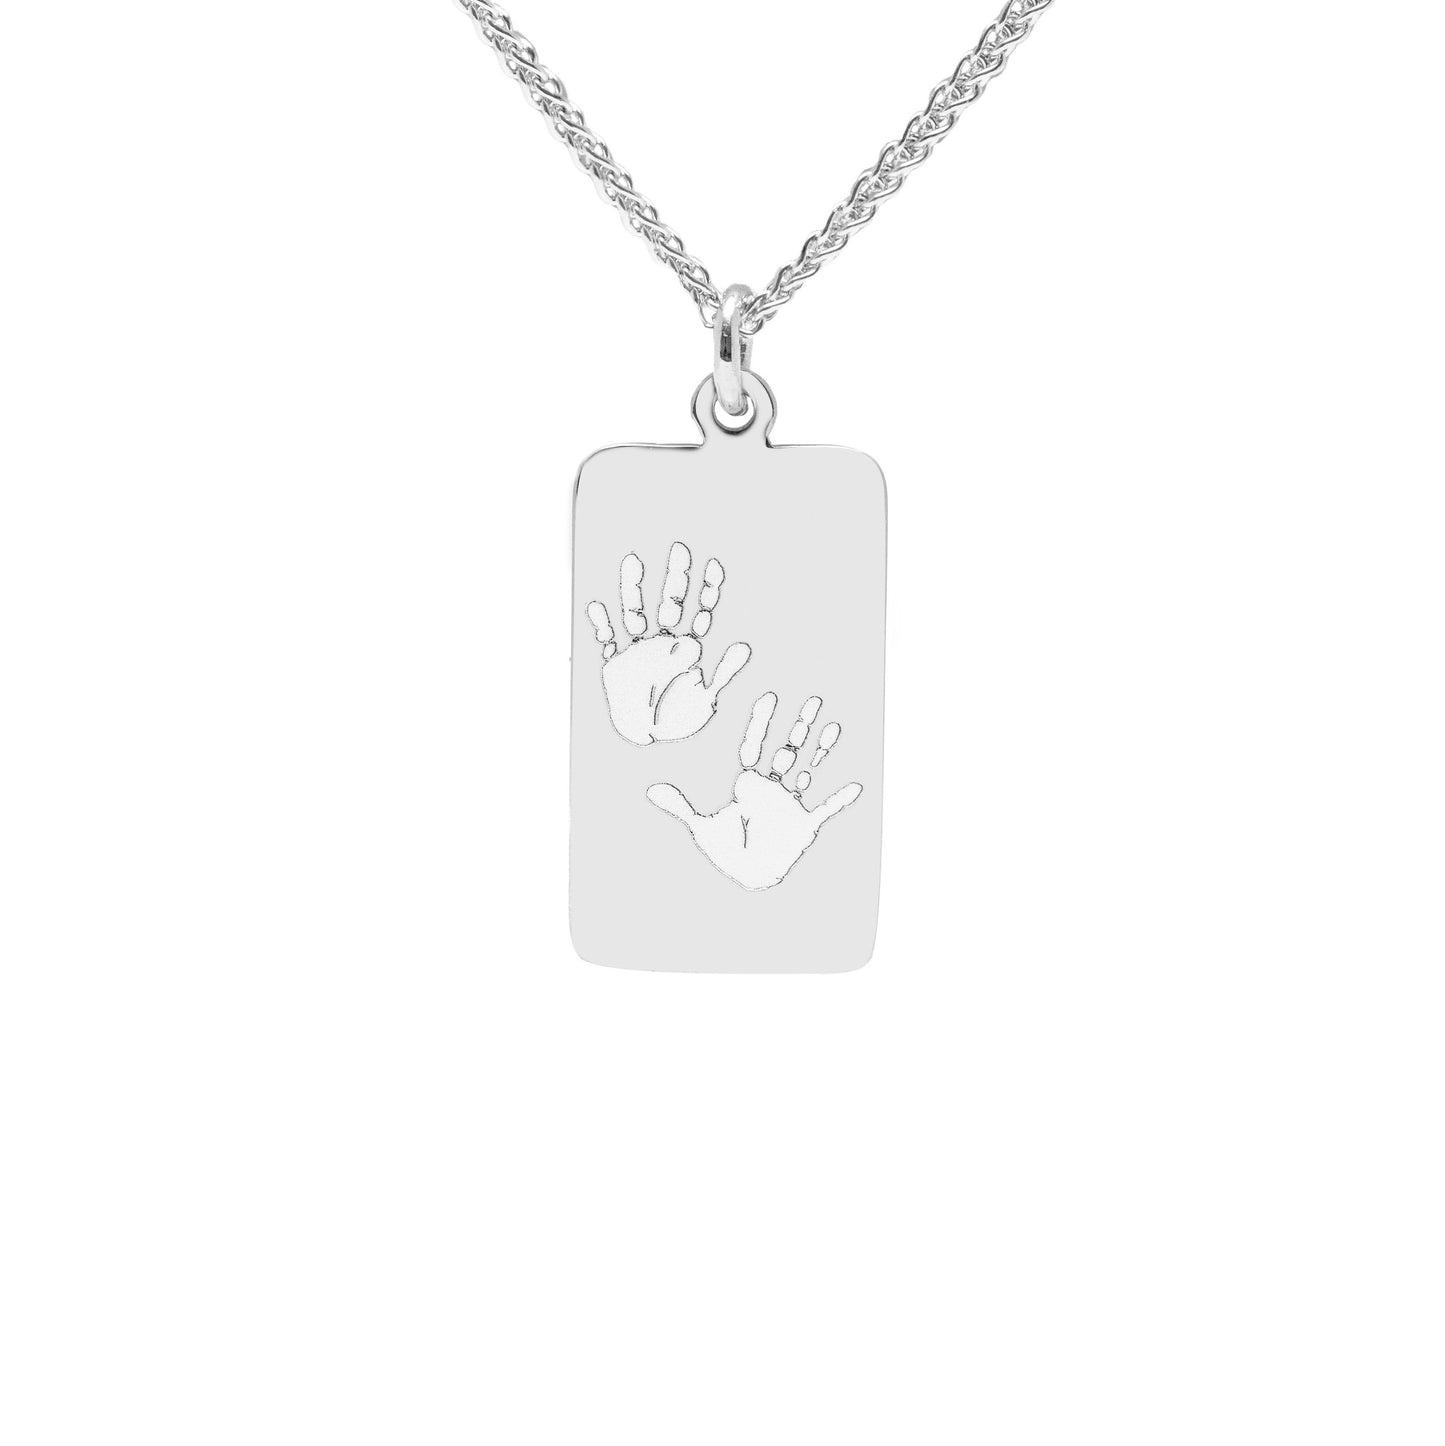 Baby Handprint / Footprint Wheat Chain Tag Necklace